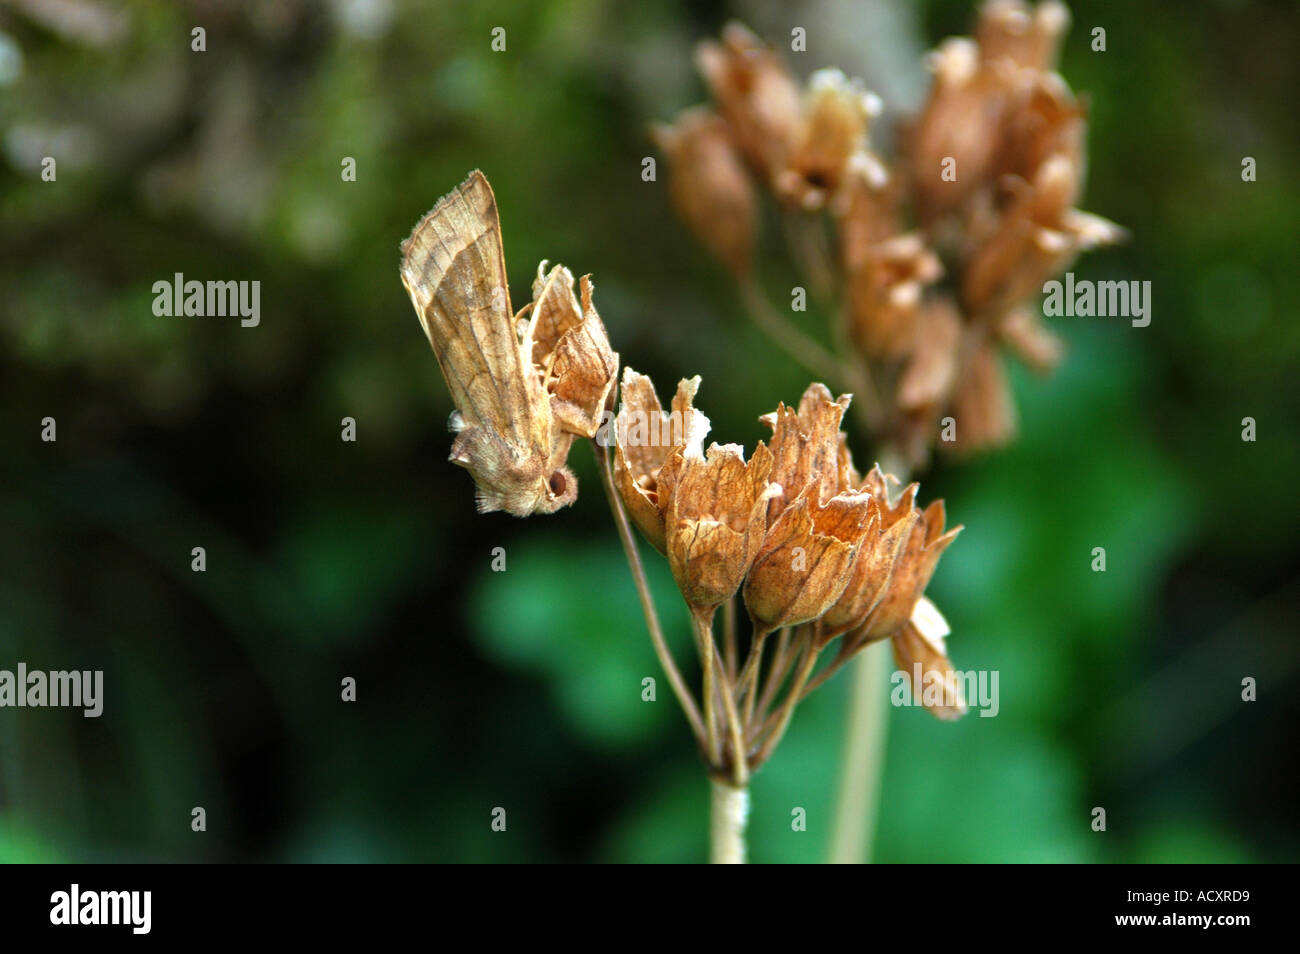 Camouflaged Rosy Rustic Moth Resting on a Dead Flower Stock Photo